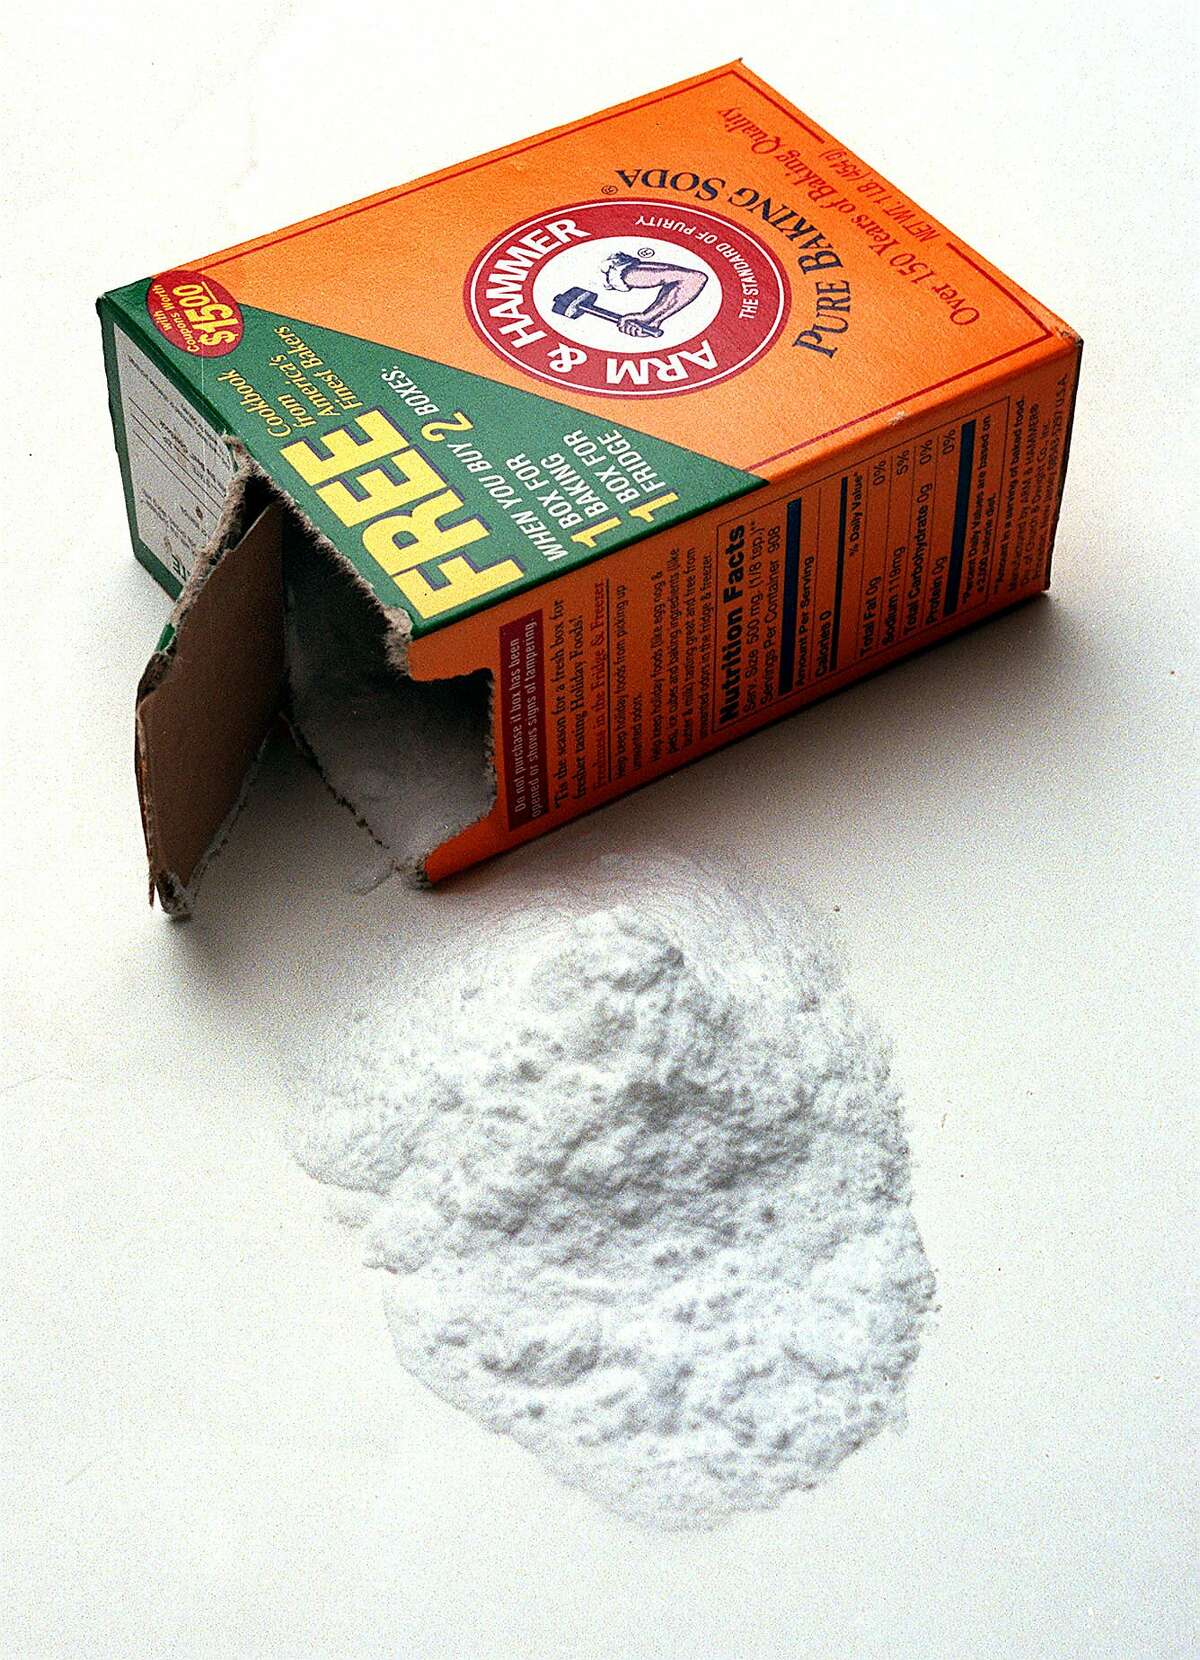 Sprinkle baking soda on funky rugs or upholstery, leave it for a few hours (or overnight), then vacuum it up.